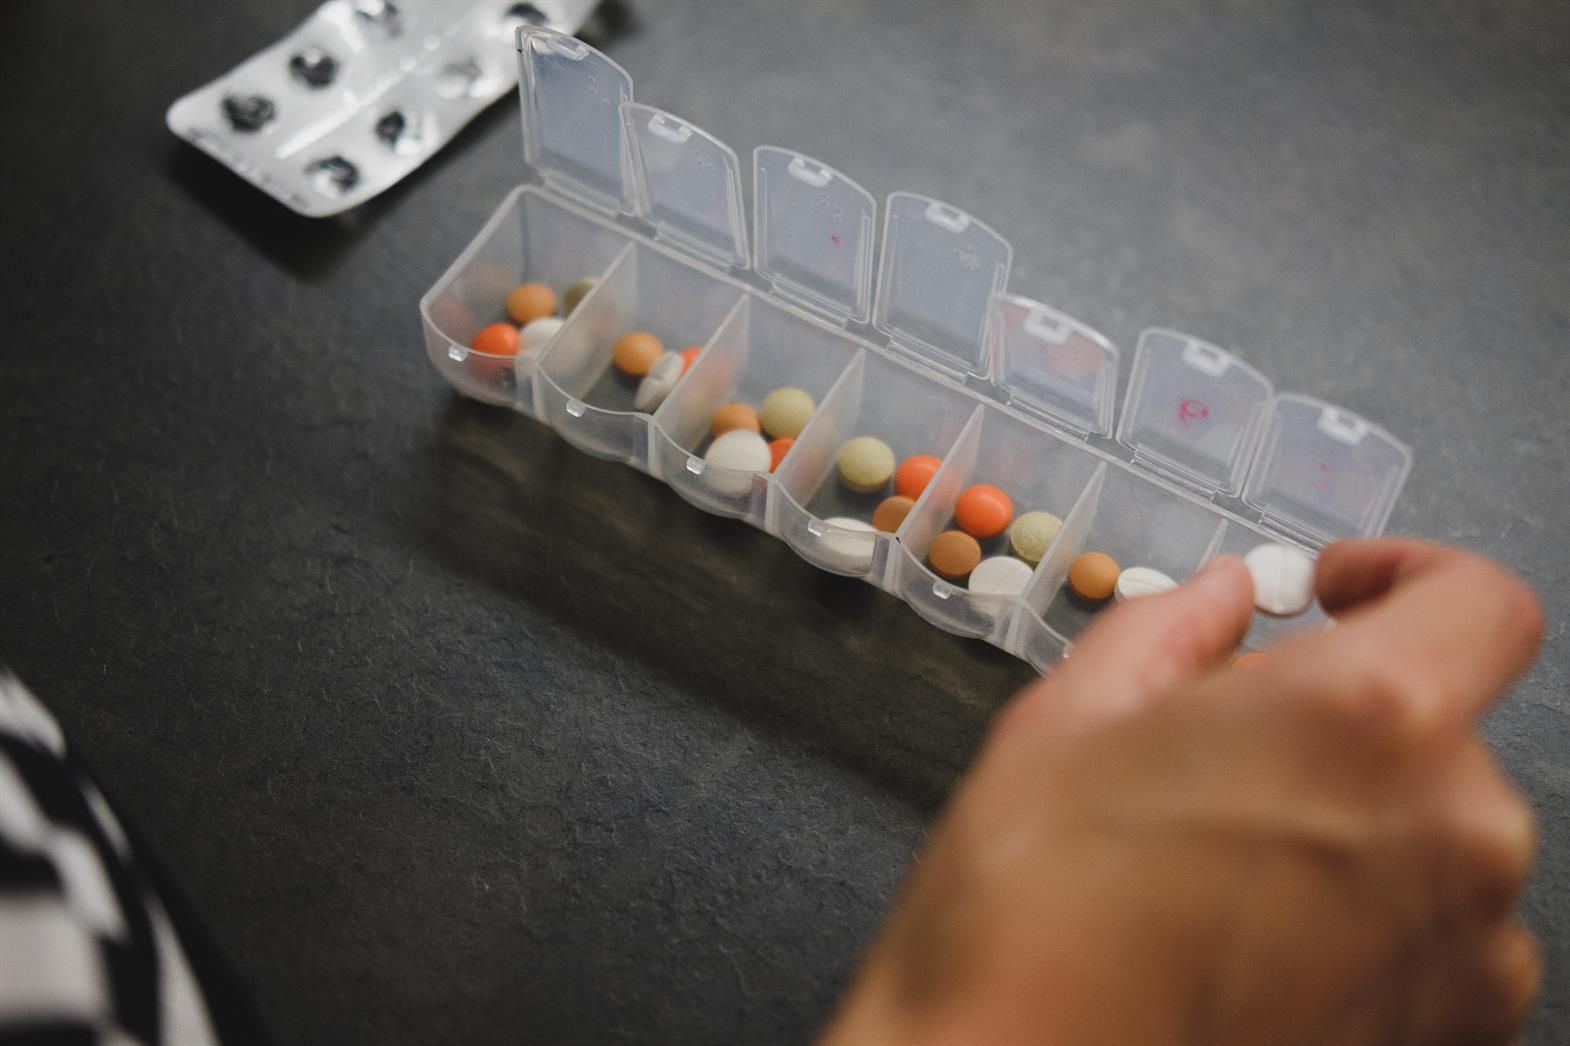 A weekly pill organizer with many pills in it. A hand is taking one of the pills out of the organizer